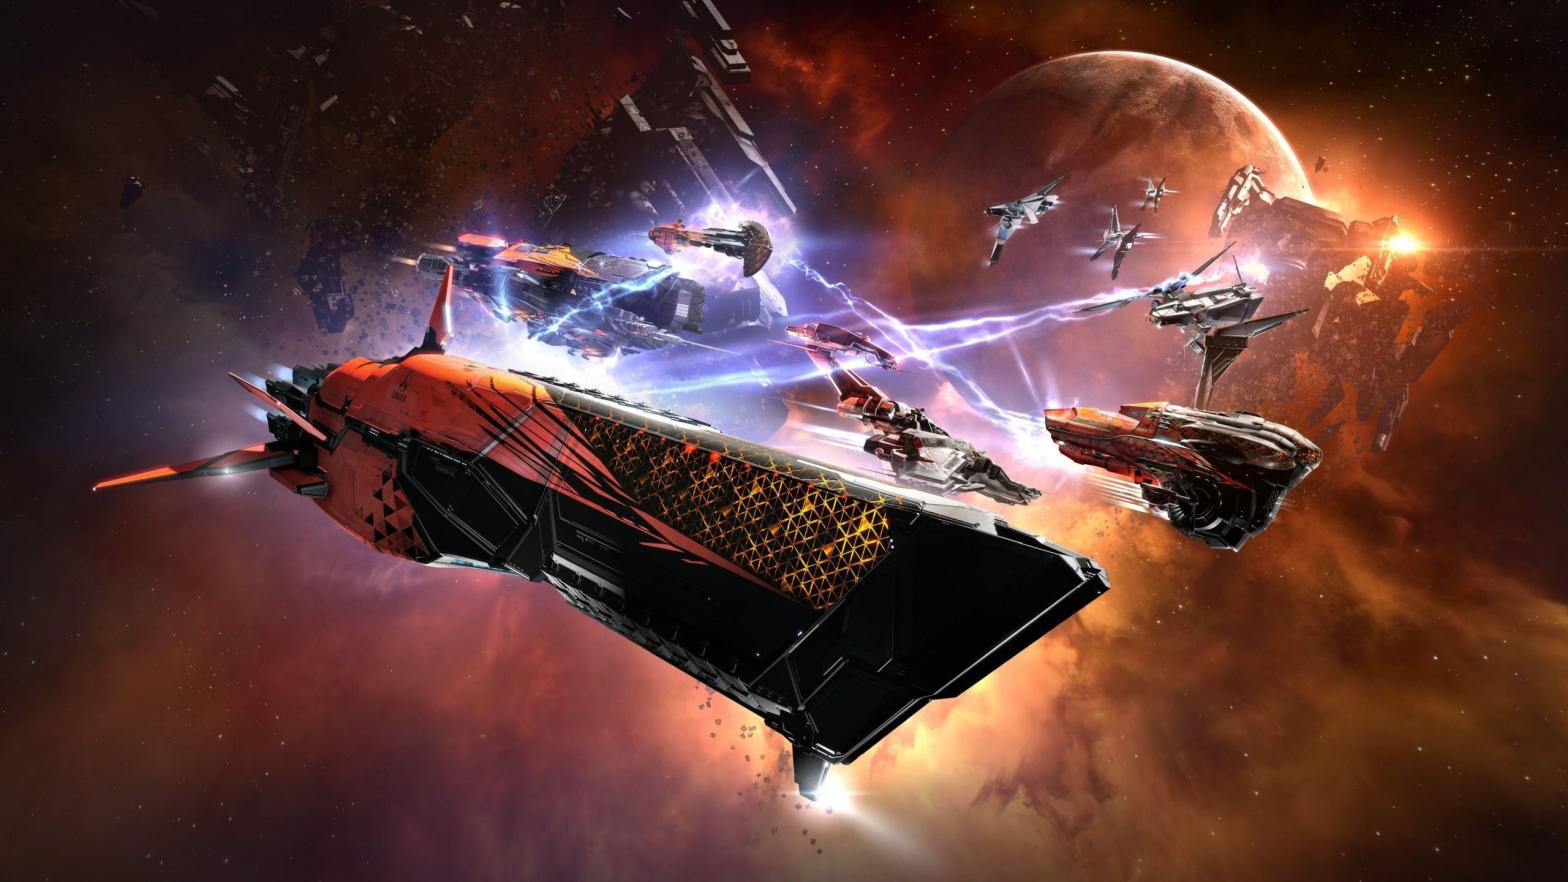 Header Image (Graphic: CCP Games)